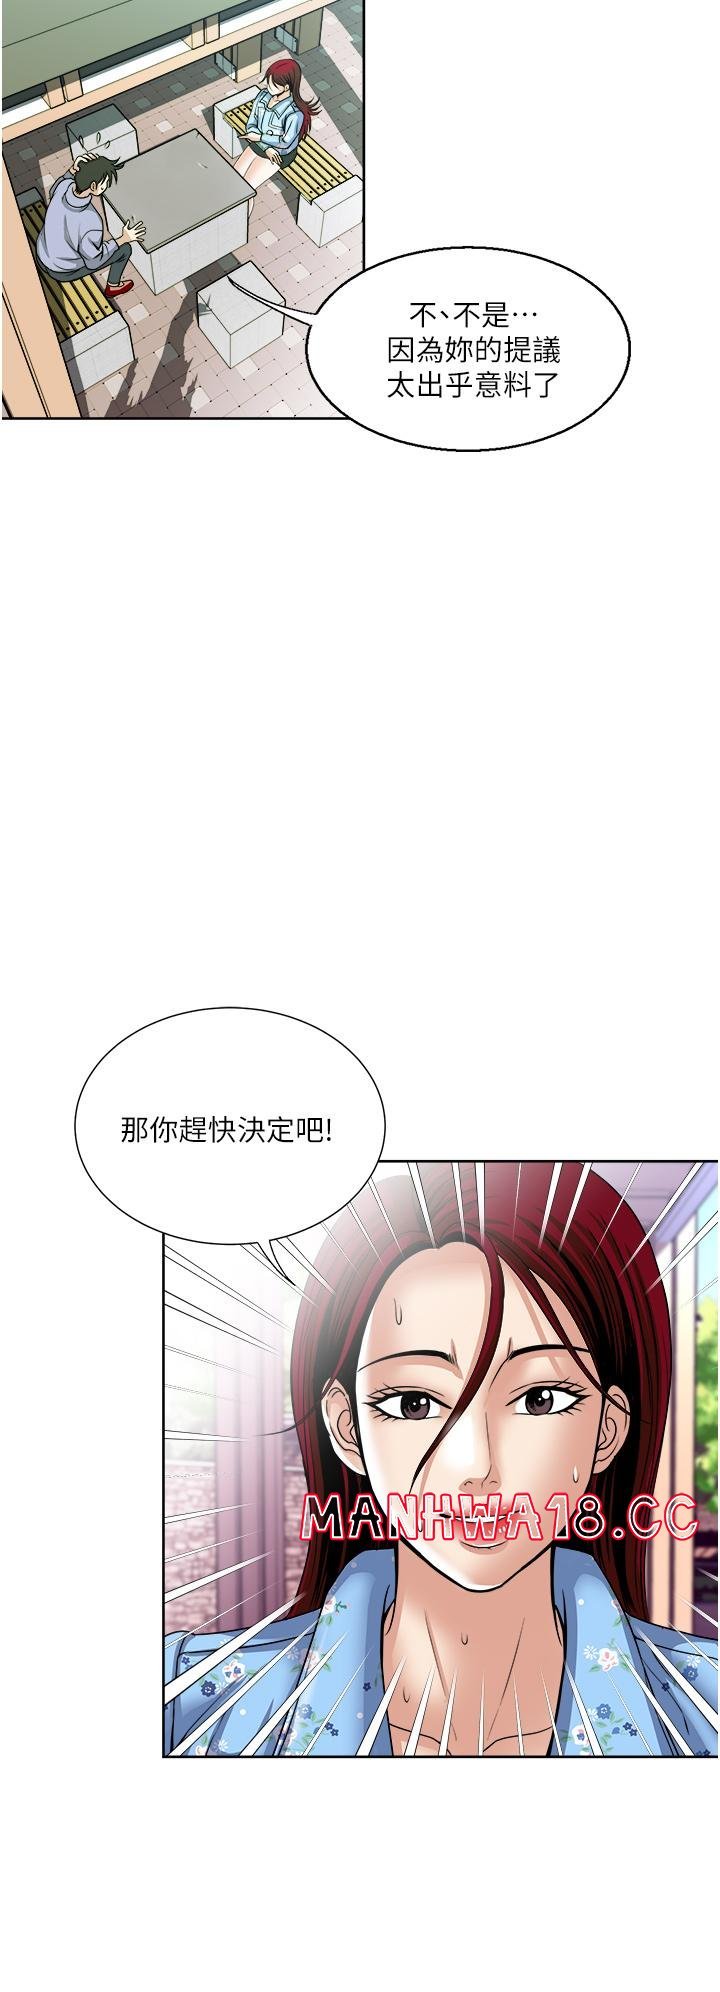 just-once-raw-chap-36-21